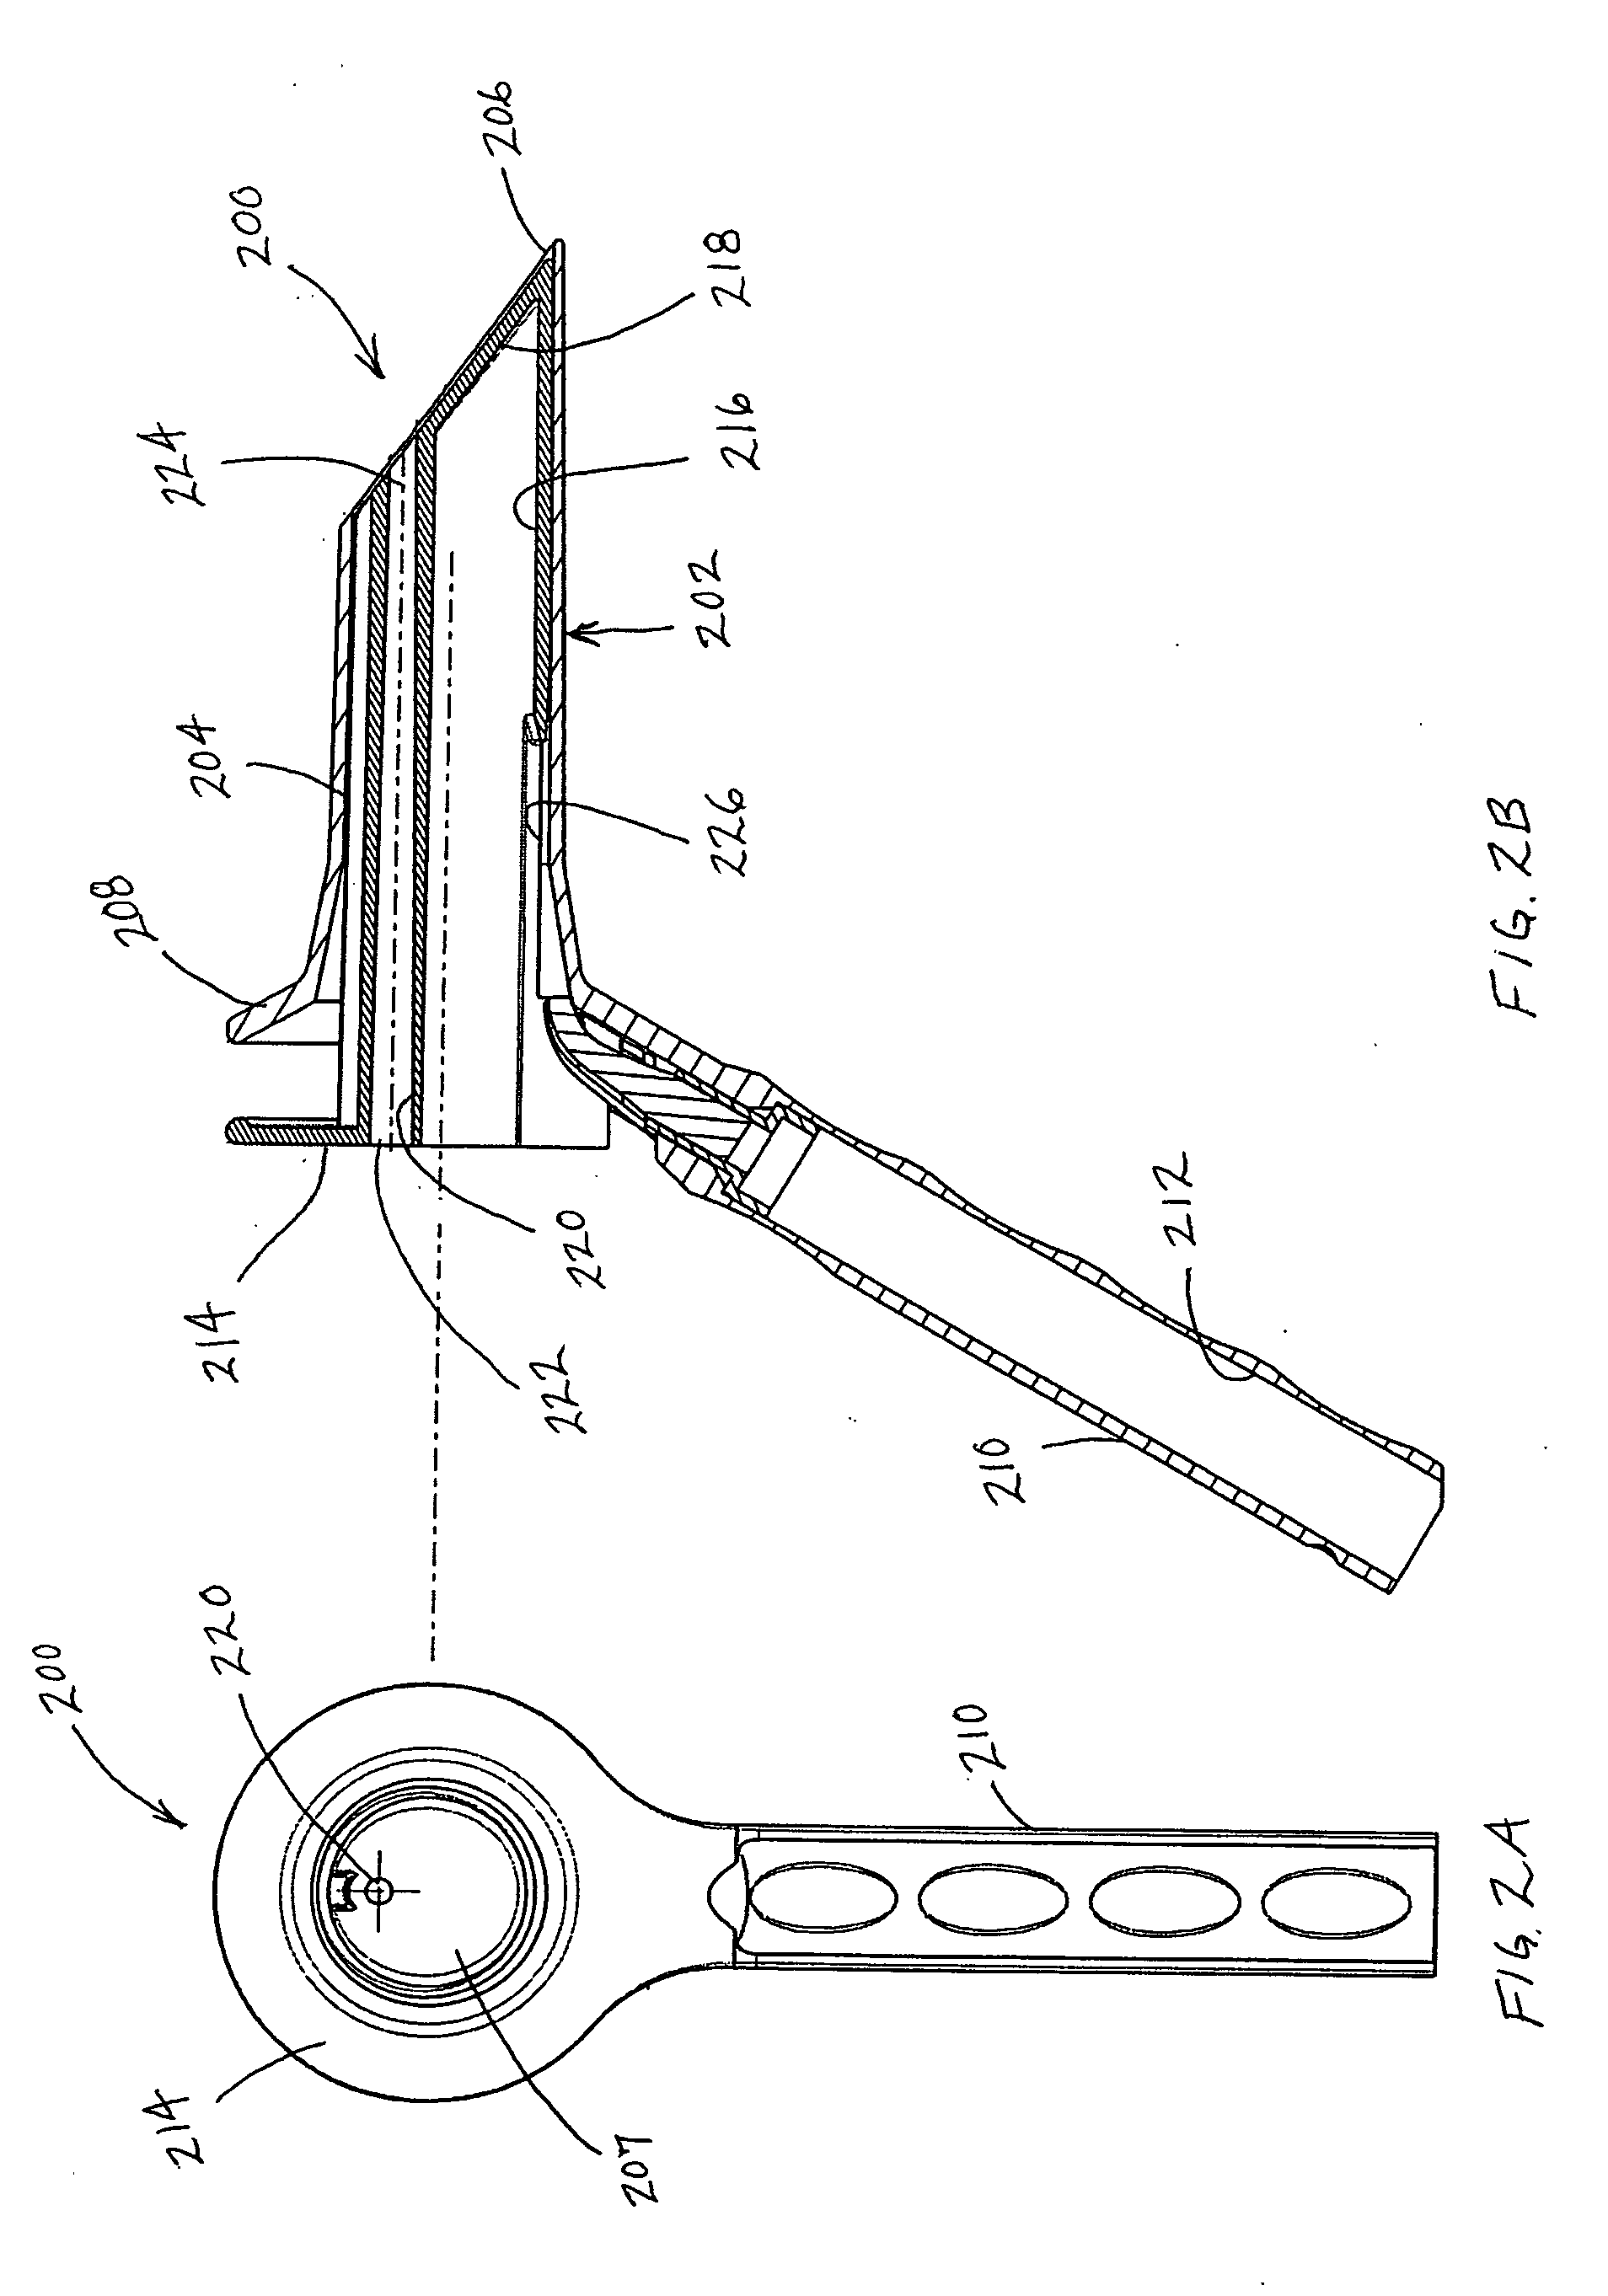 System and Method for Treating Hemorrhoids